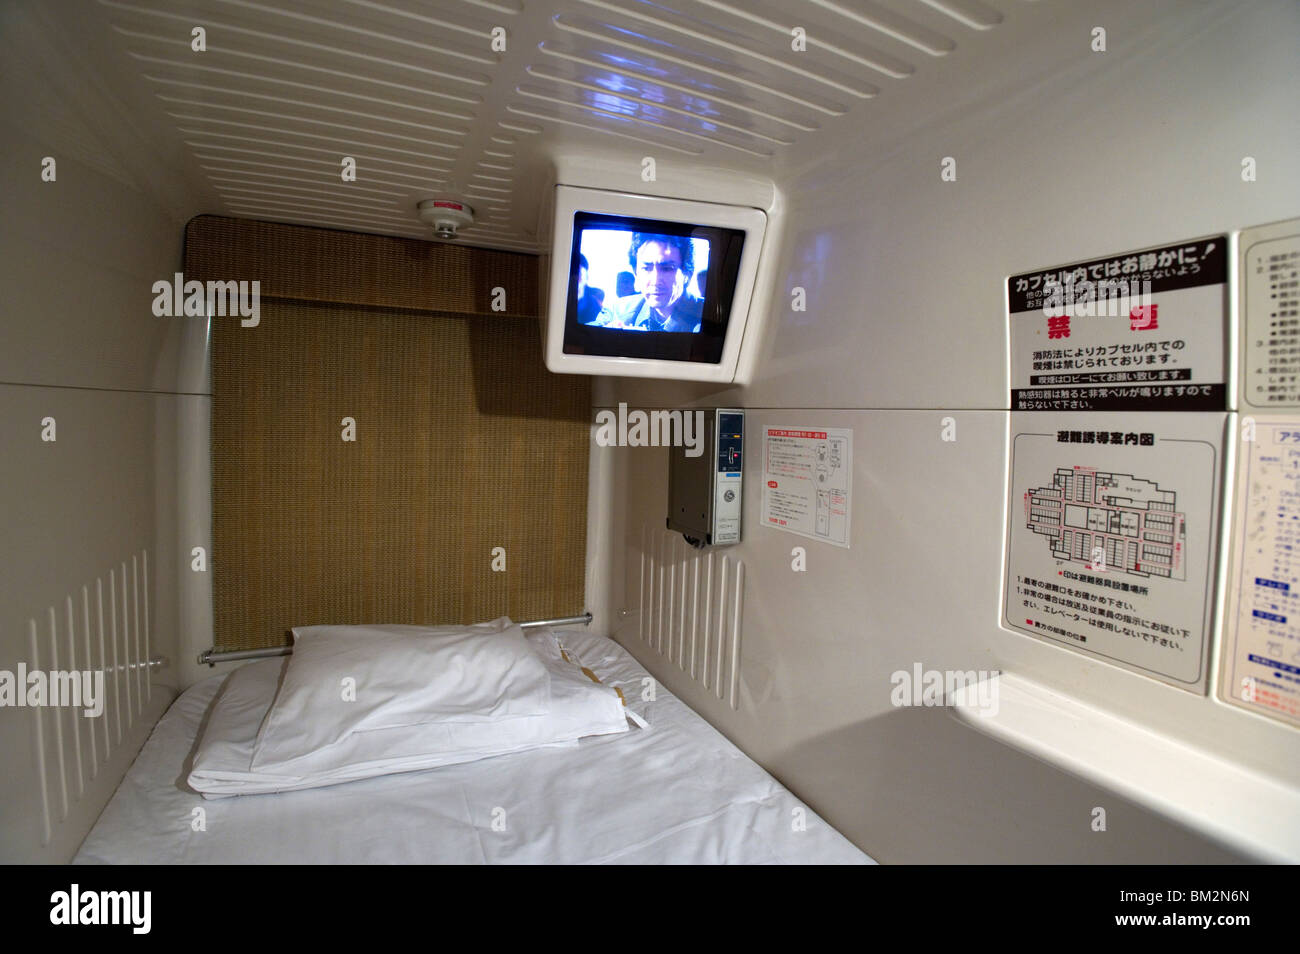 Interior view of single-person sleeping compartment at capsule hotel in Osaka, Japan Stock Photo